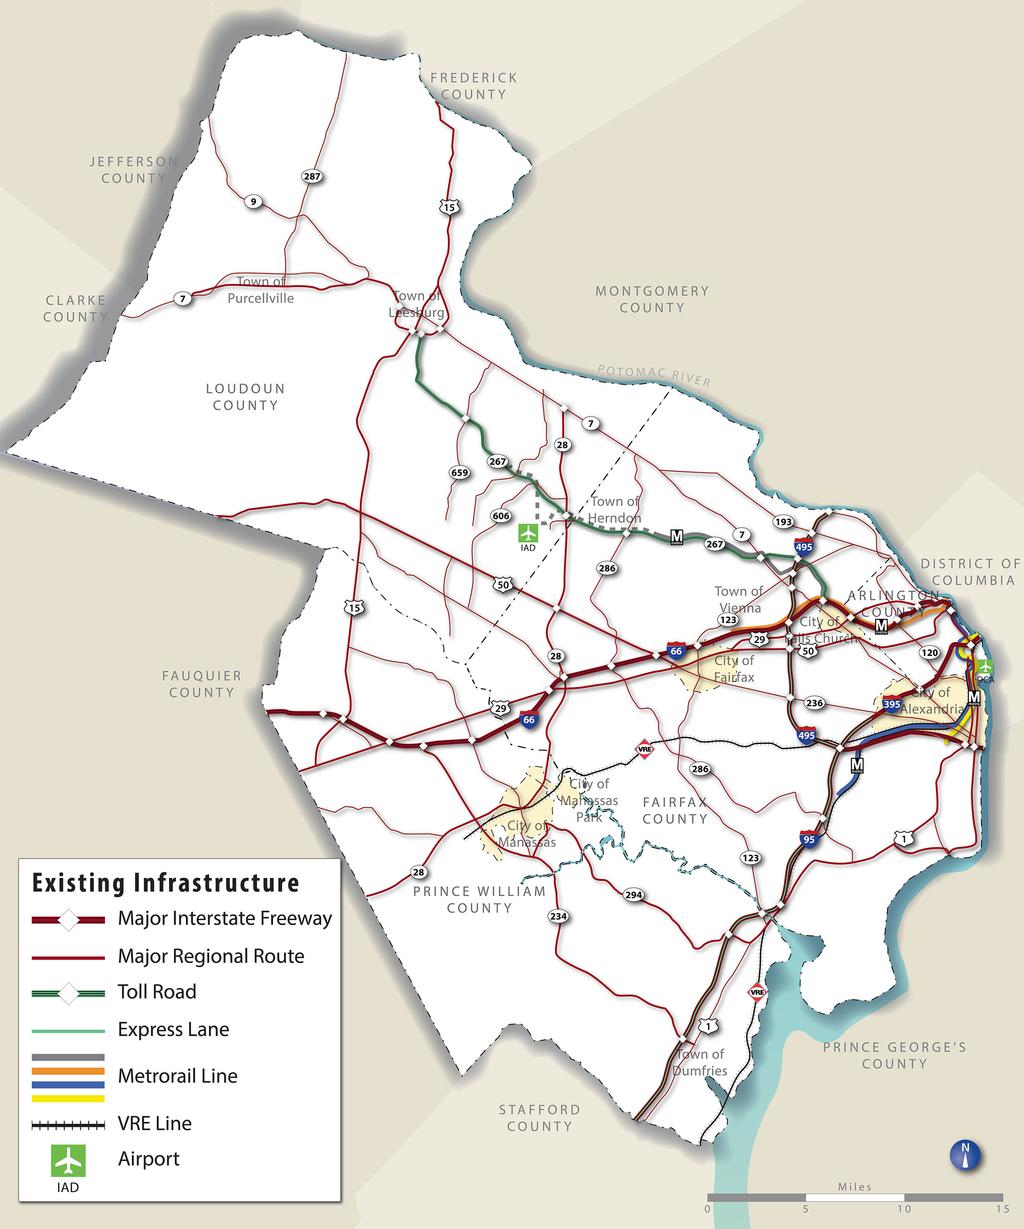 CHAPTER 2: THE REGIONAL TRANSPORTATION NETWORK TransAction Draft Technical Report Northern Virginia is located in one of the largest metropolitan areas in the country and has a complex and expansive